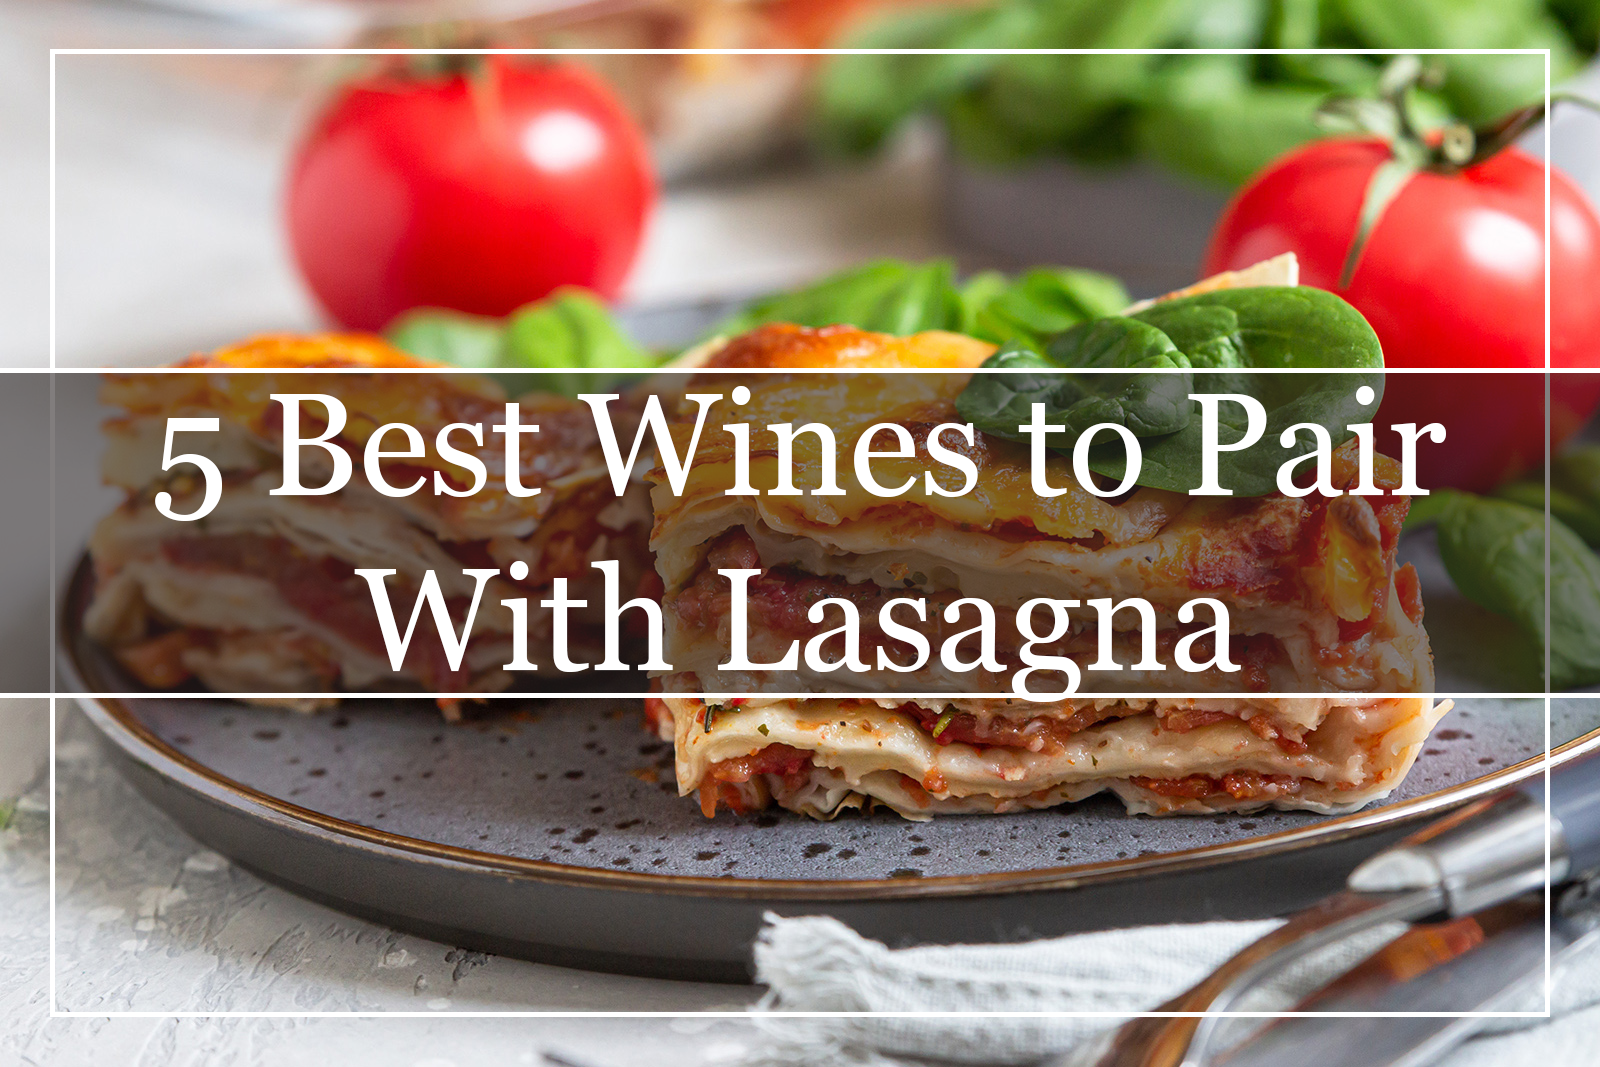 5 Best Wines to Pair With Lasagna (2022)